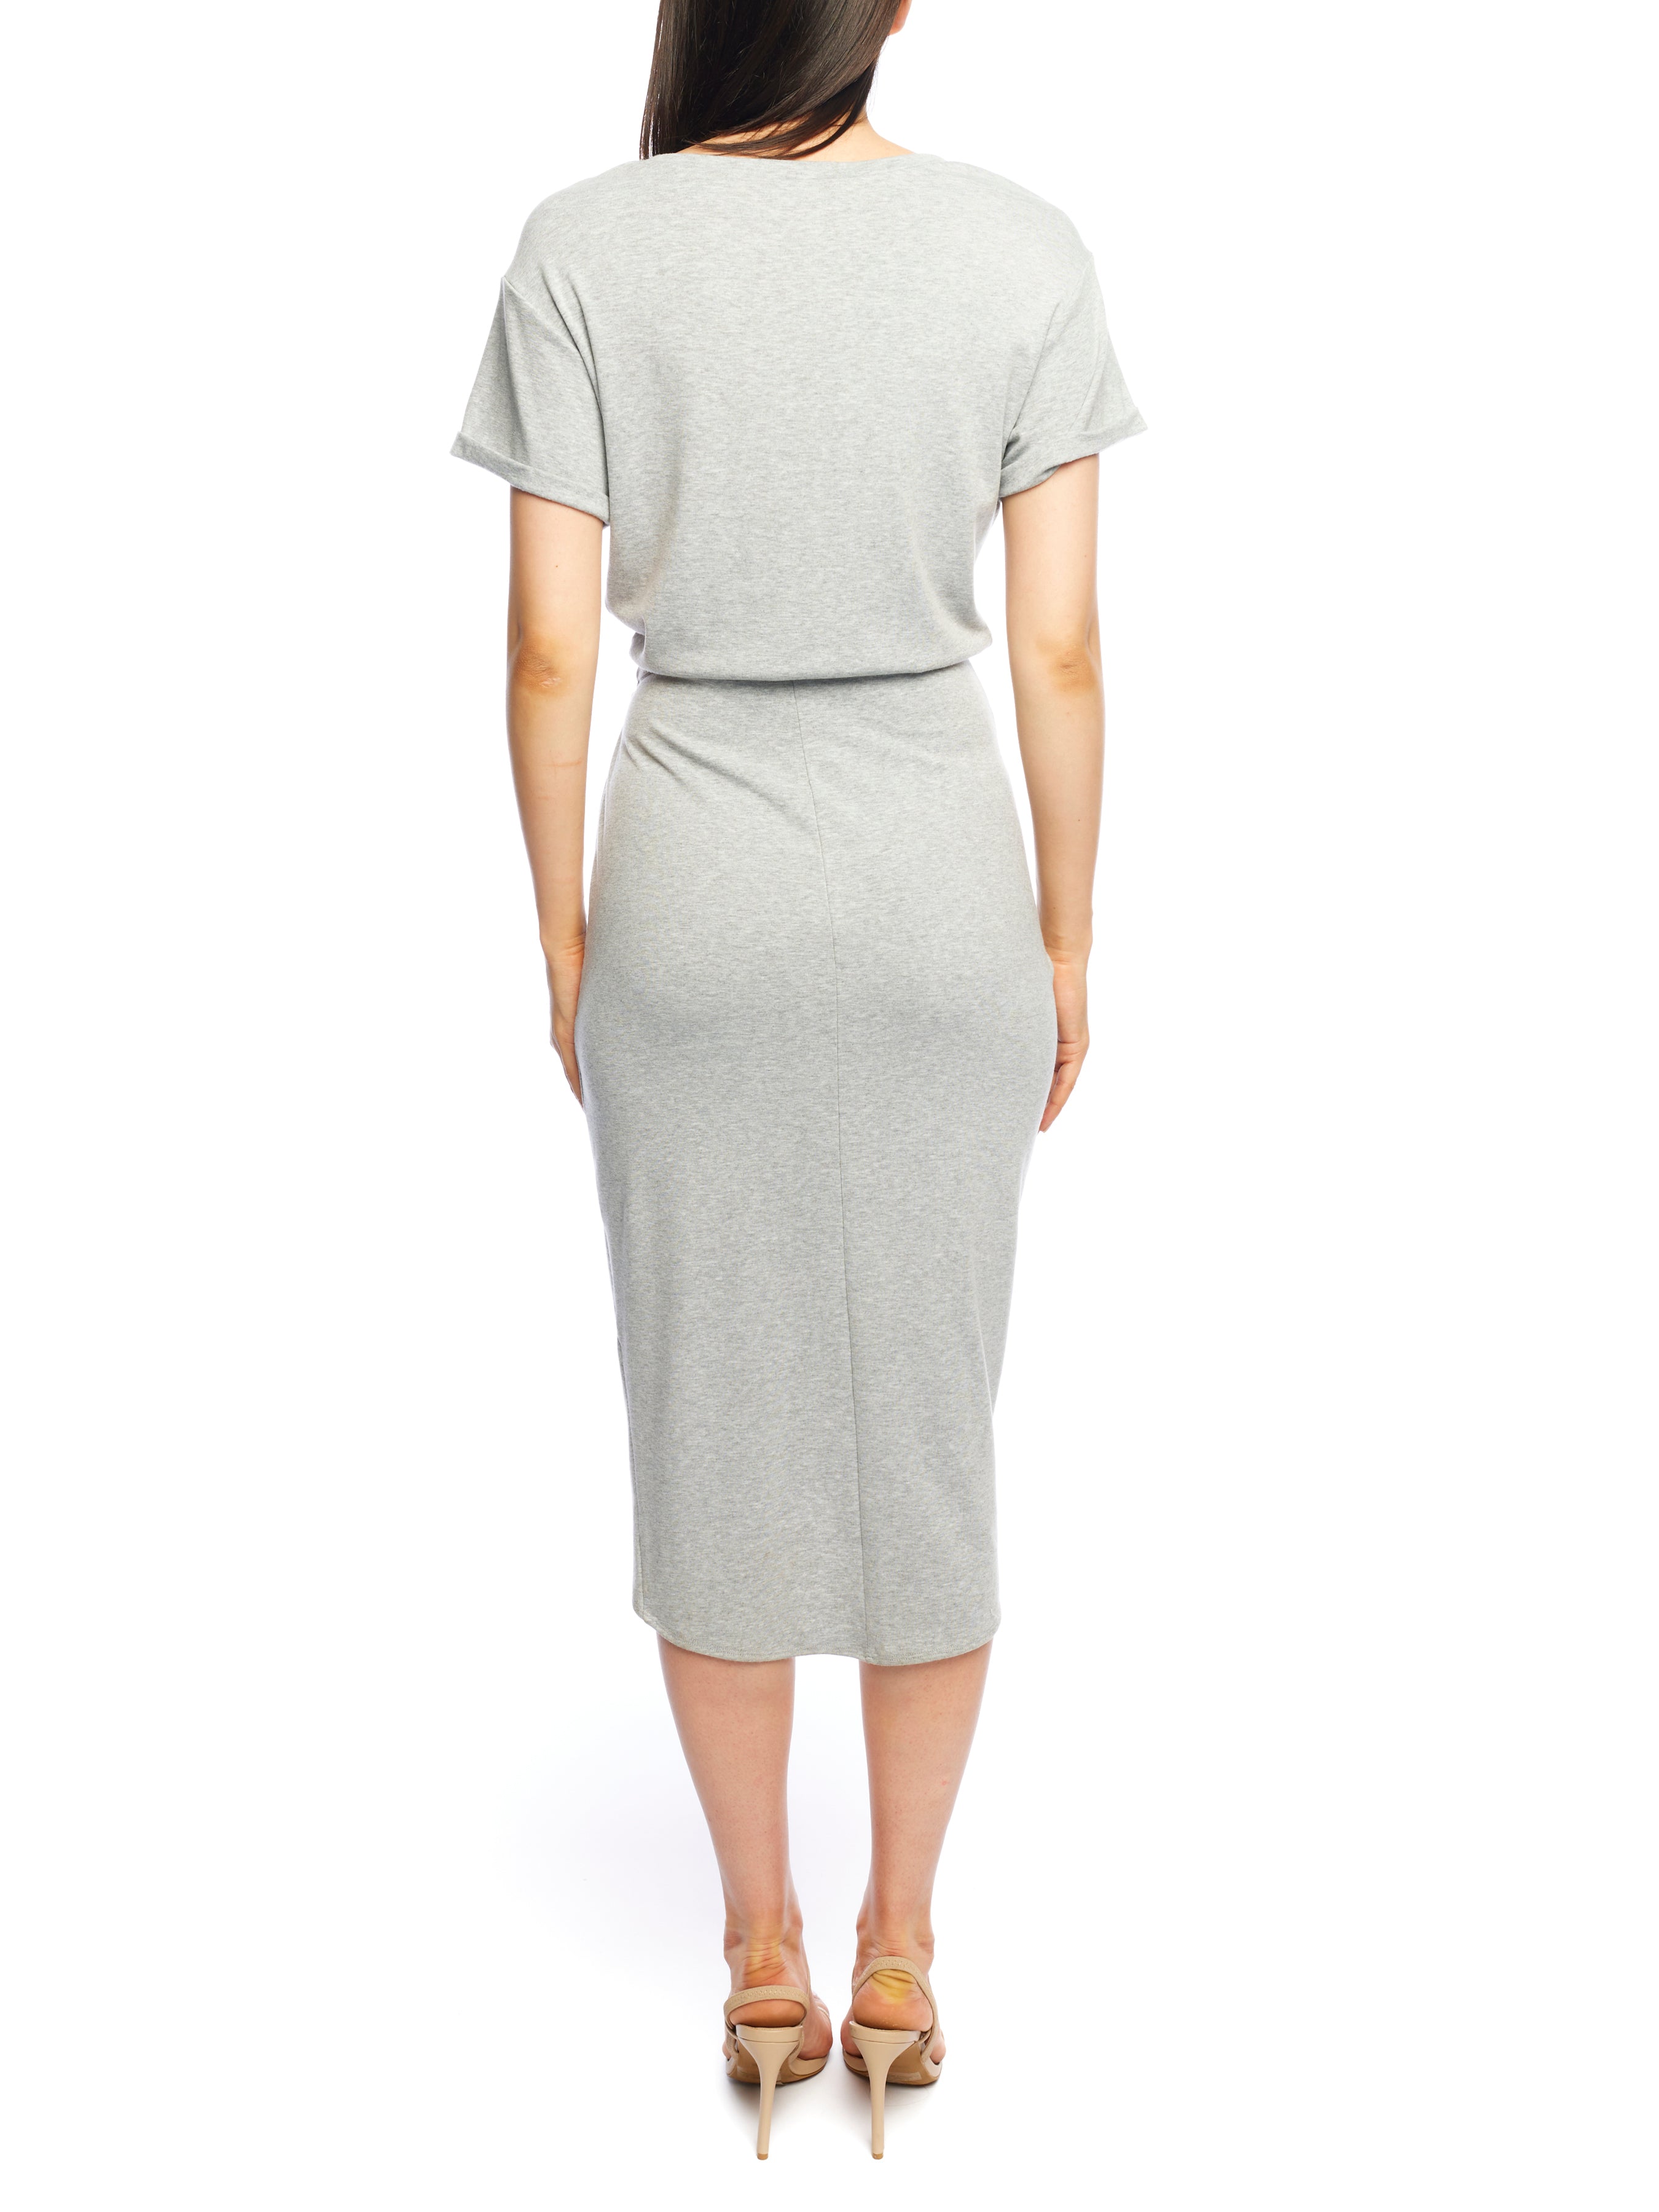 midi length wrap dress with a boat neck, short sleeves, side tie waist and tulip hem in grey